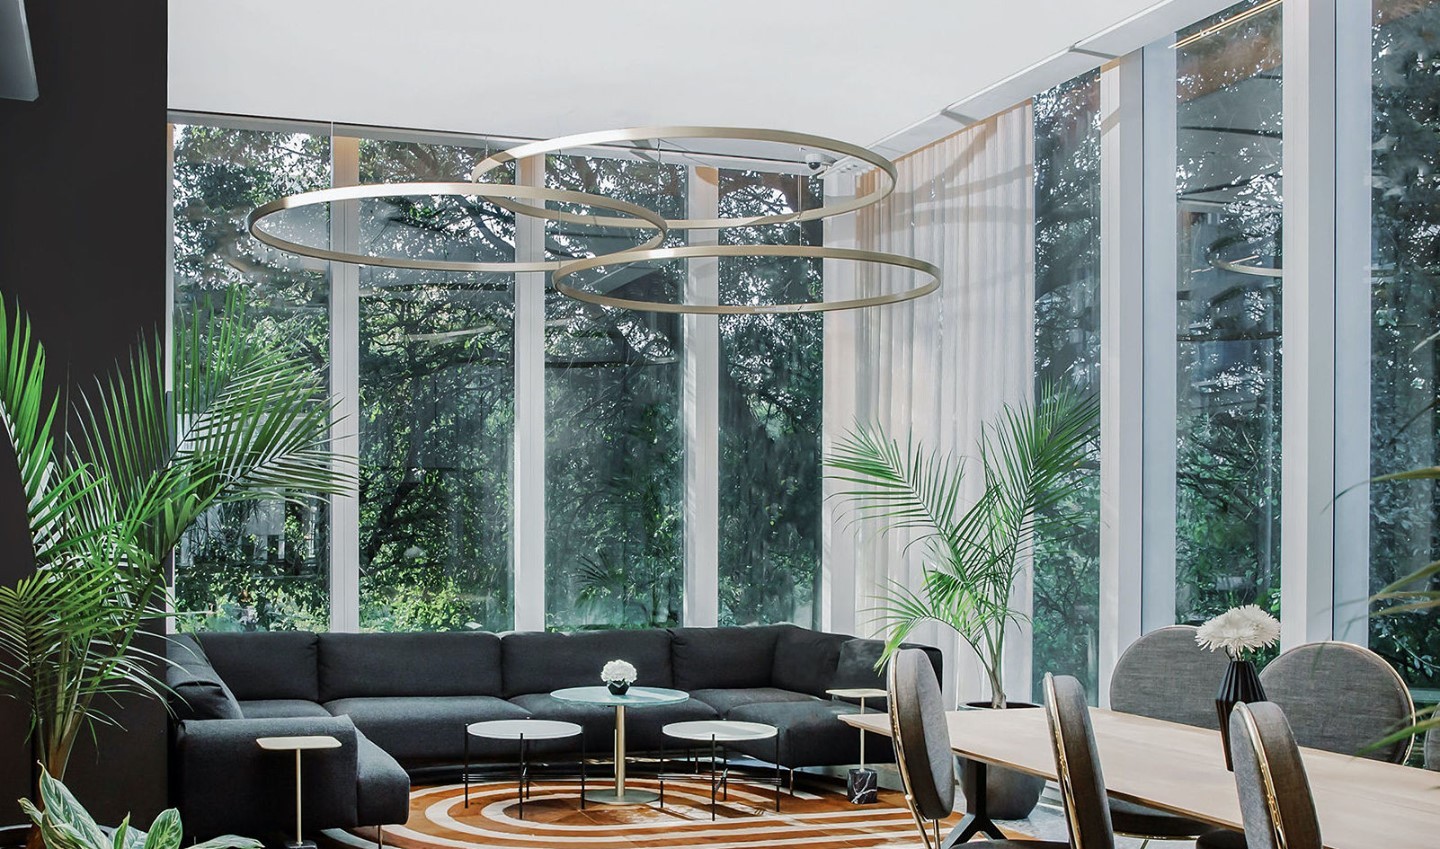 Urbanspace interiors coming in strong at Codependant! ⁠
⁠
We love the play of light and dark with the lush green of Shoal Creek as a backdrop. ⁠
⁠
A true privilege to be part of the team to deliver this vision.